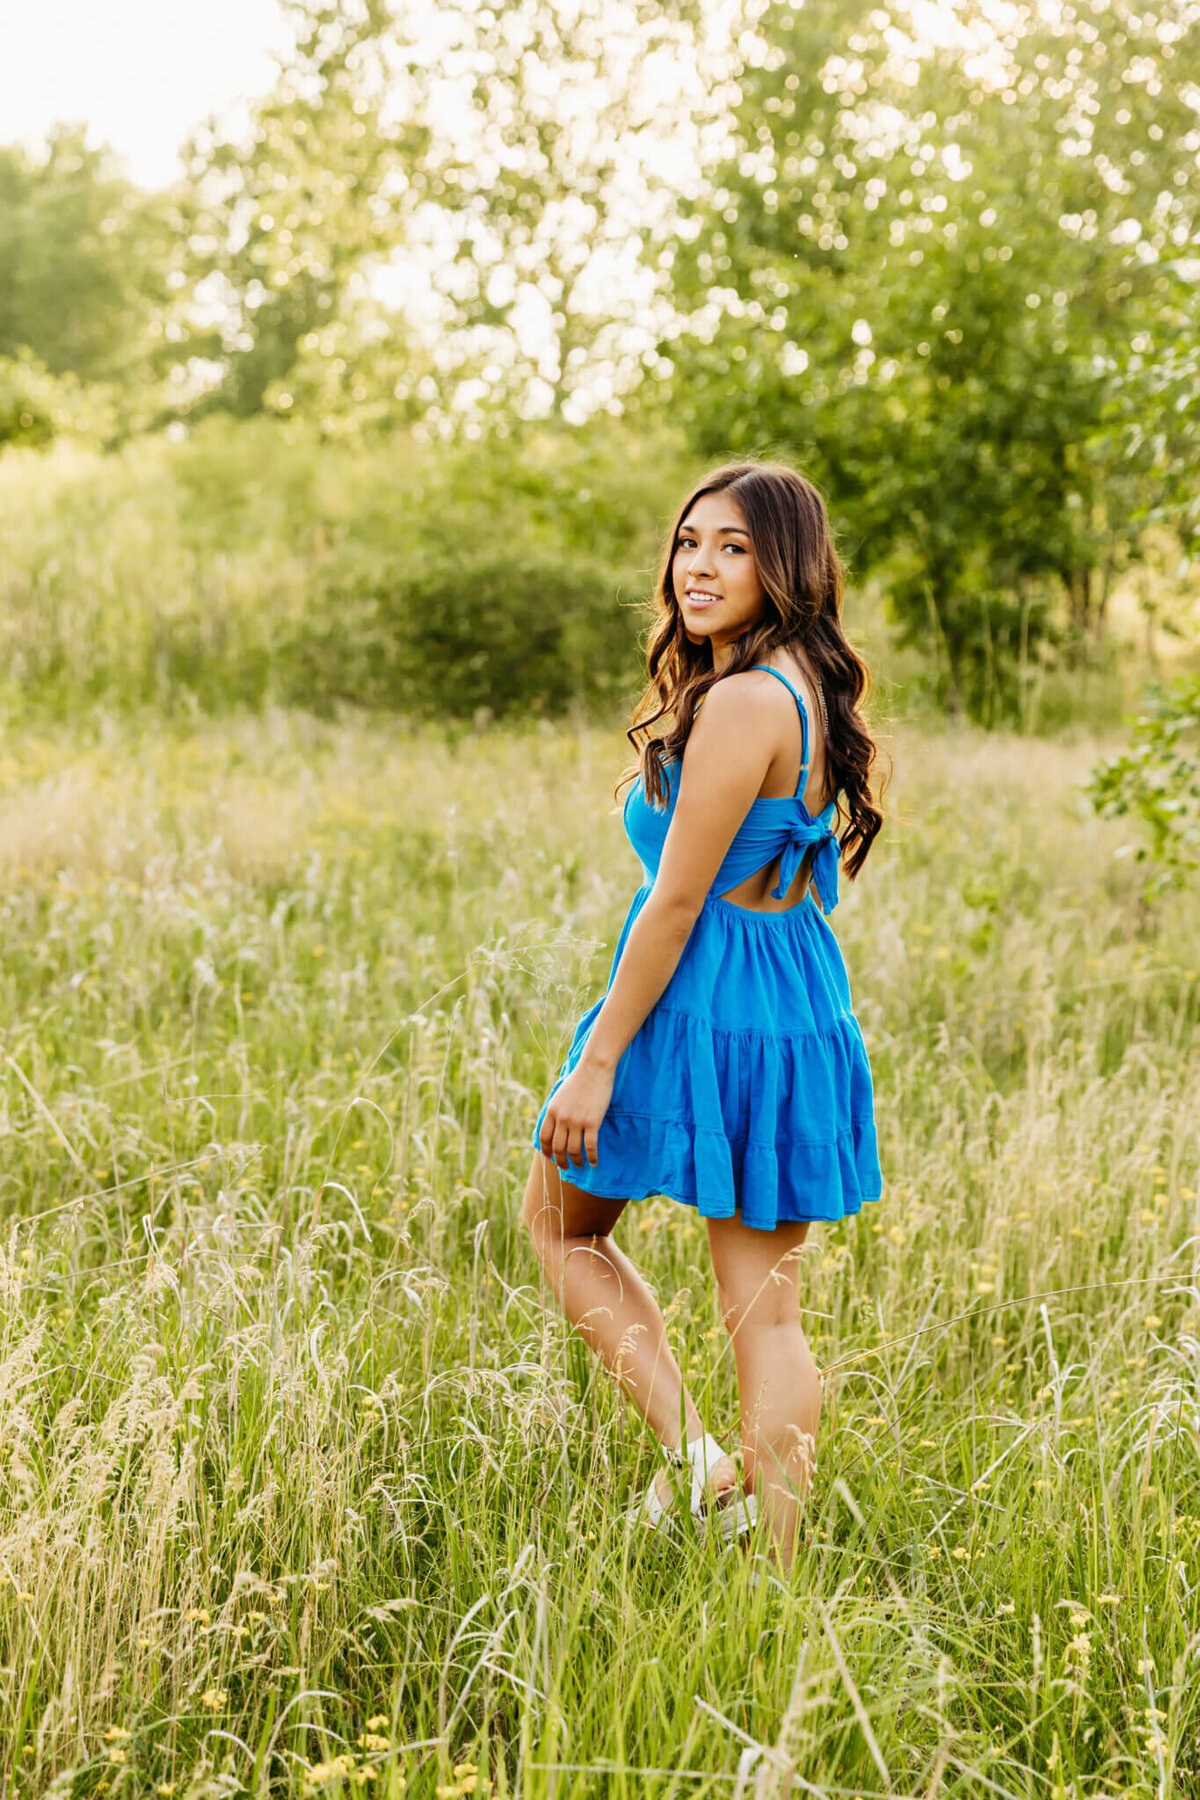 brown hair teenage girl walking in a blue dress and looking back during her senior photography session